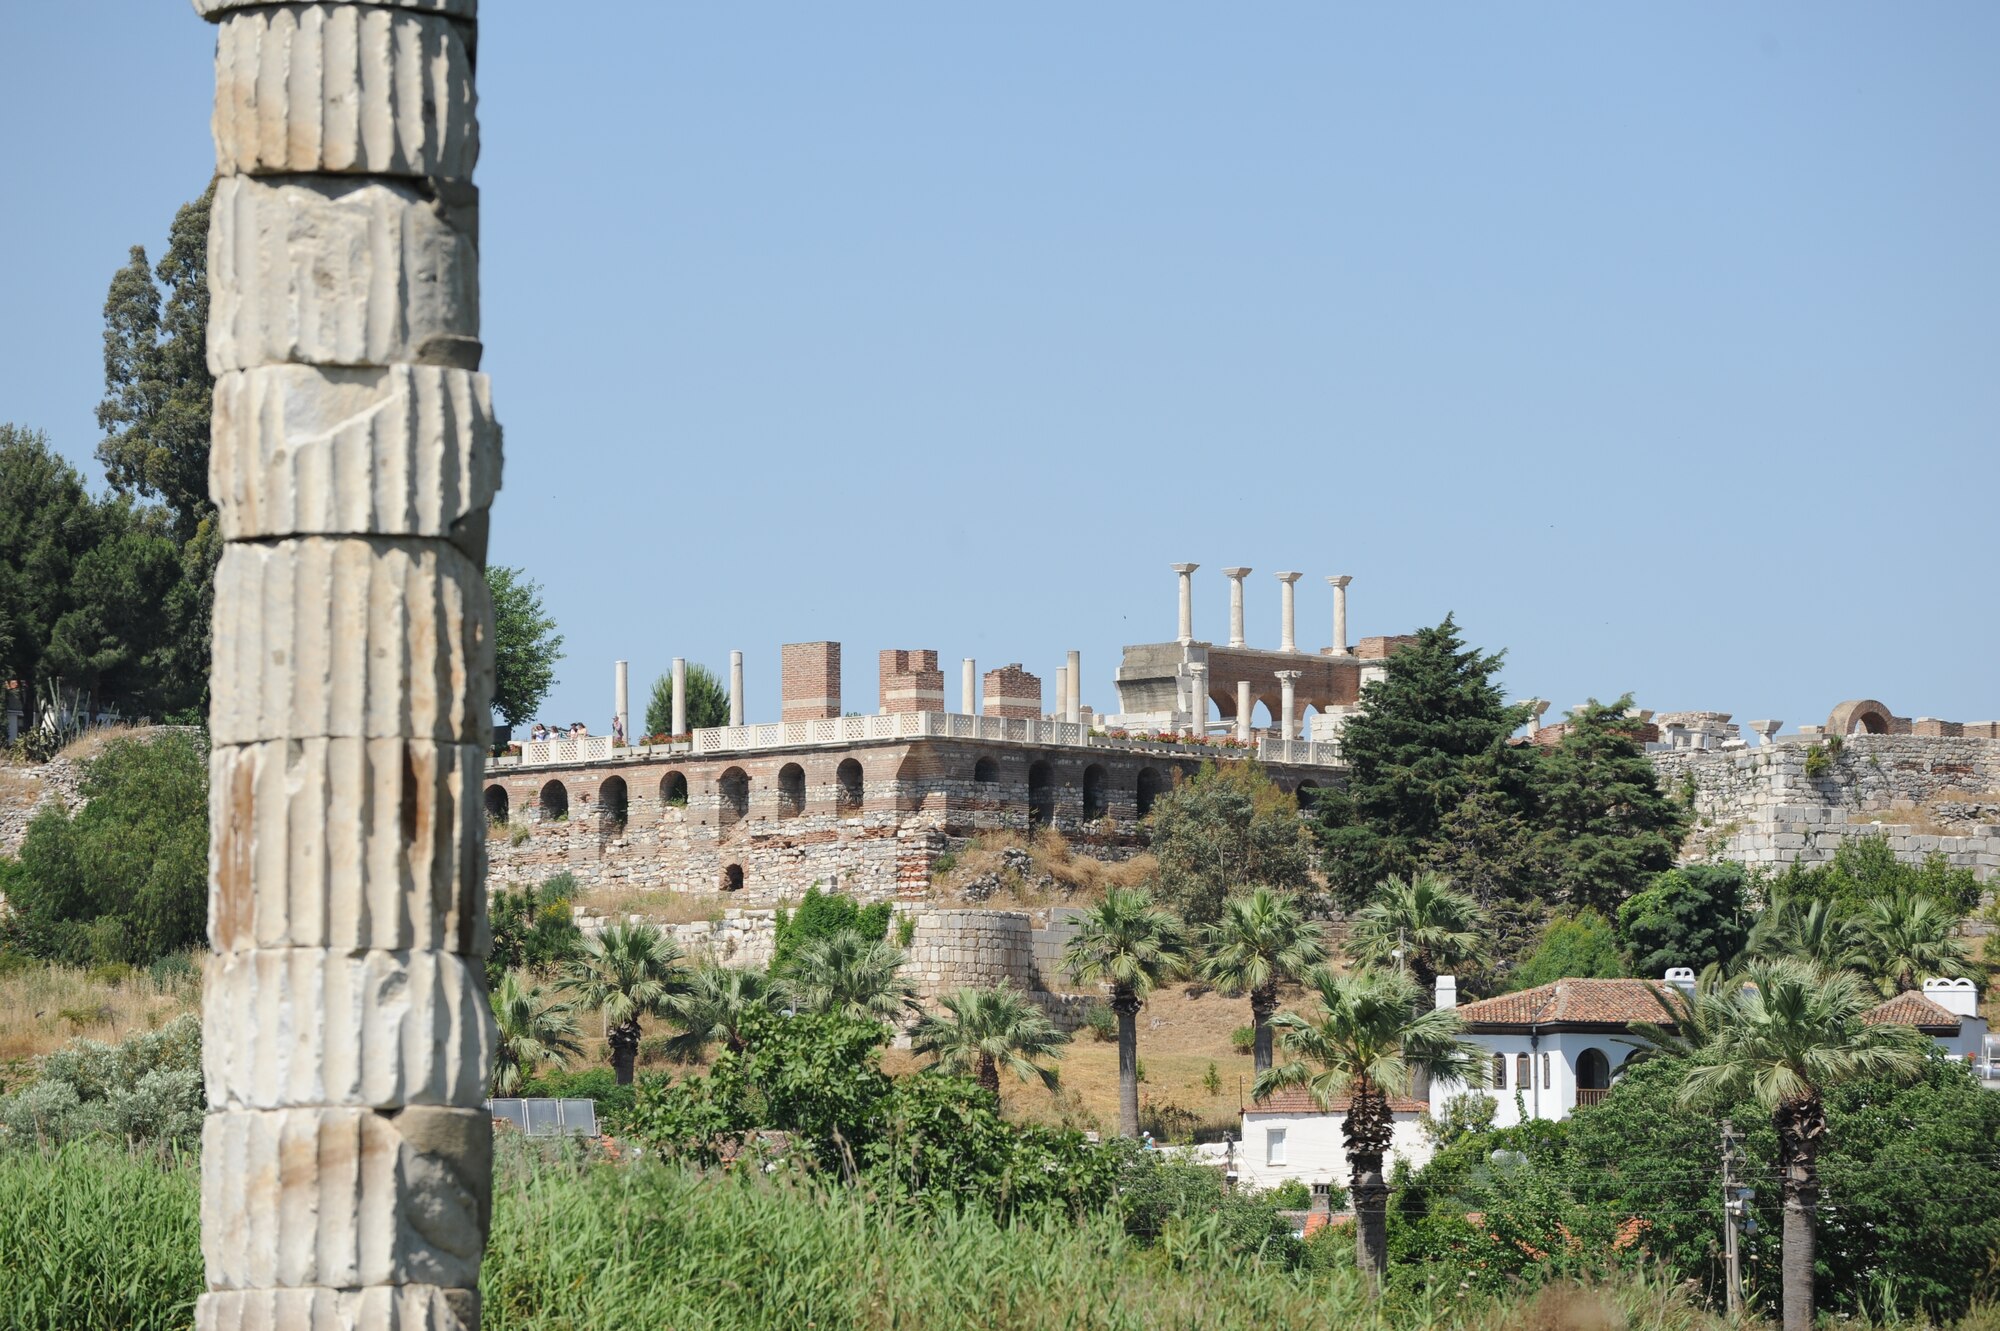 The Temple of Artemis, one of the Seven Wonders of the Ancient World, is located in Ephesus, Selcuk, Turkey. The temple is dedicated to the Mother Goddess of Anatolia and was used not only for worship and protection from evil, but also for storage. (U.S. Air Force photo by Tech. Sgt. Valda Wilson/Released)